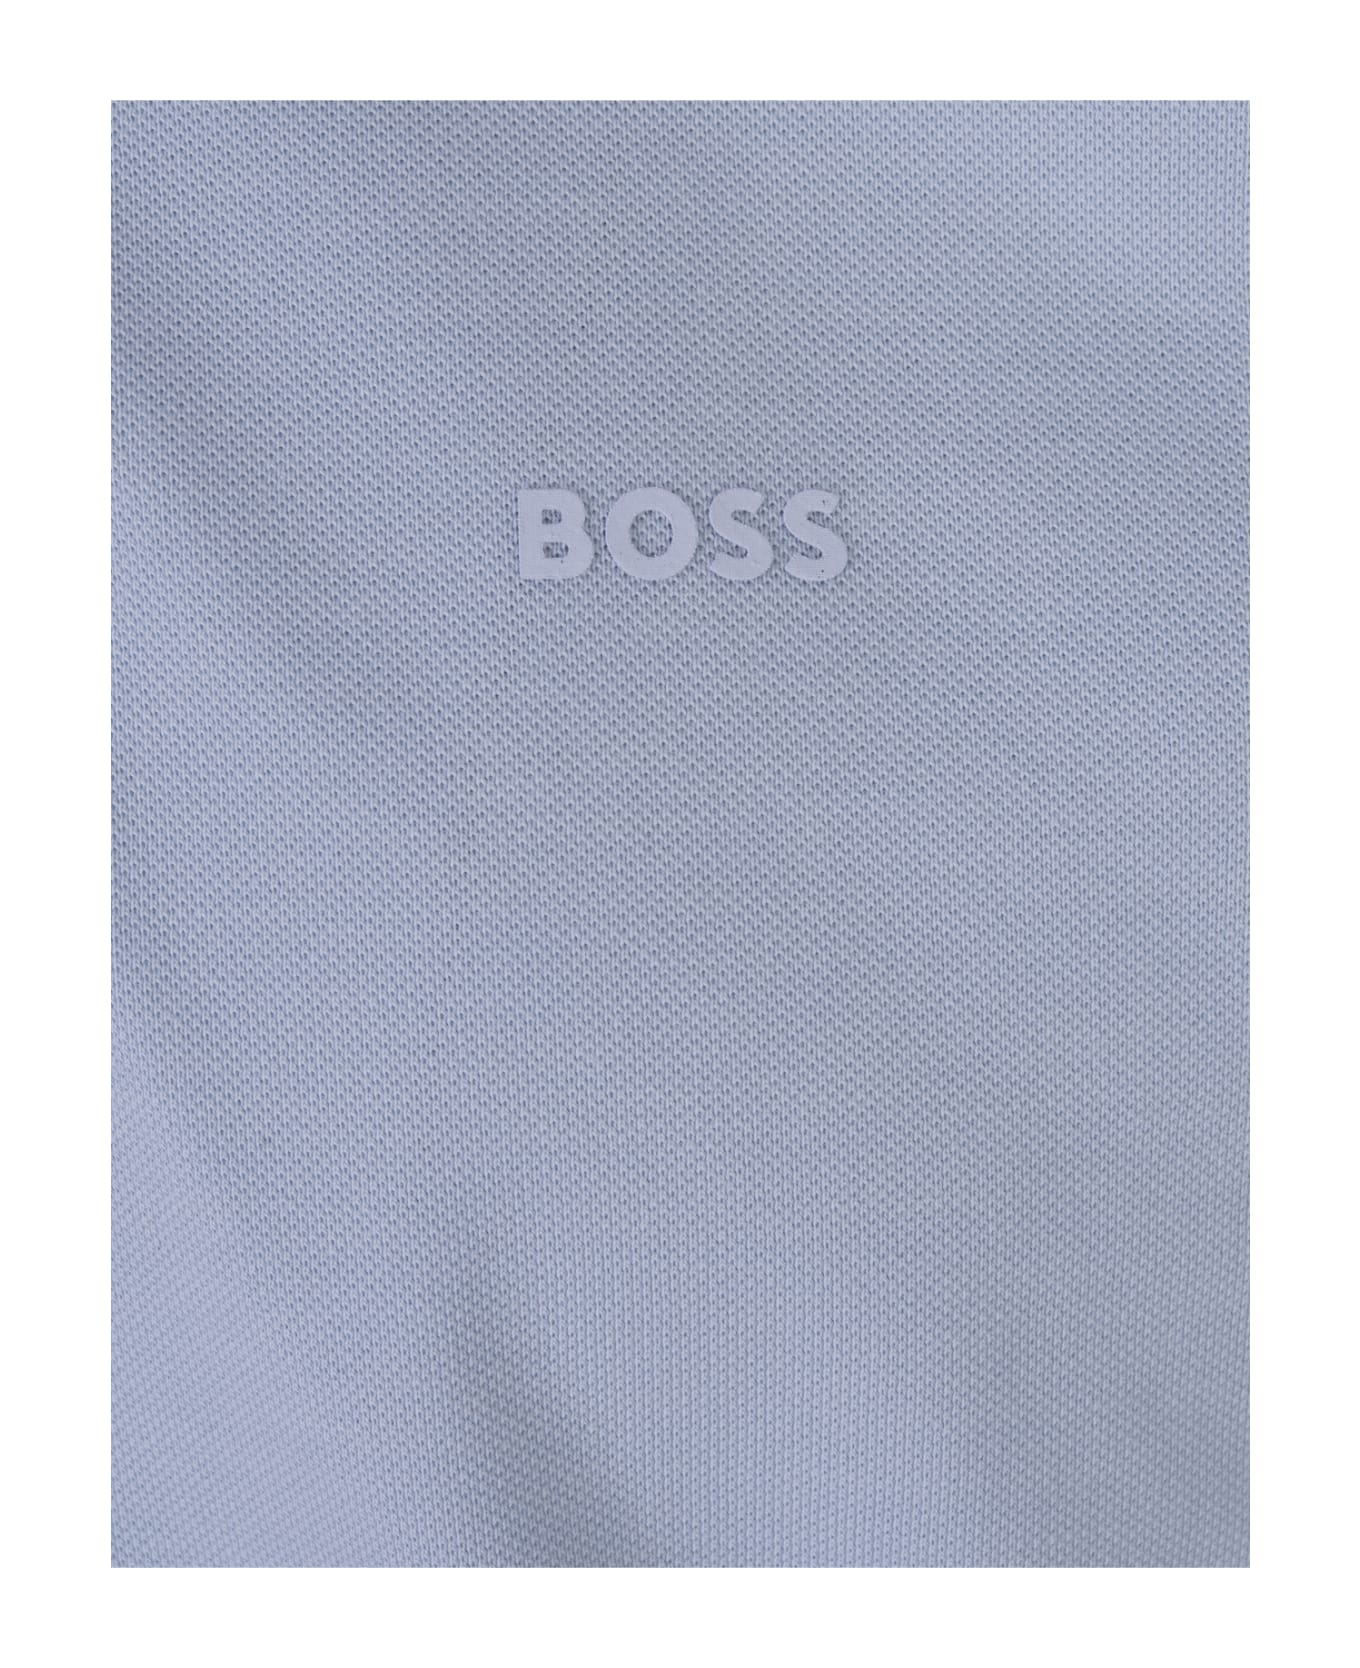 Hugo Boss Dust Blue Slim Fit Polo Shirt With Striped Collar - Blue